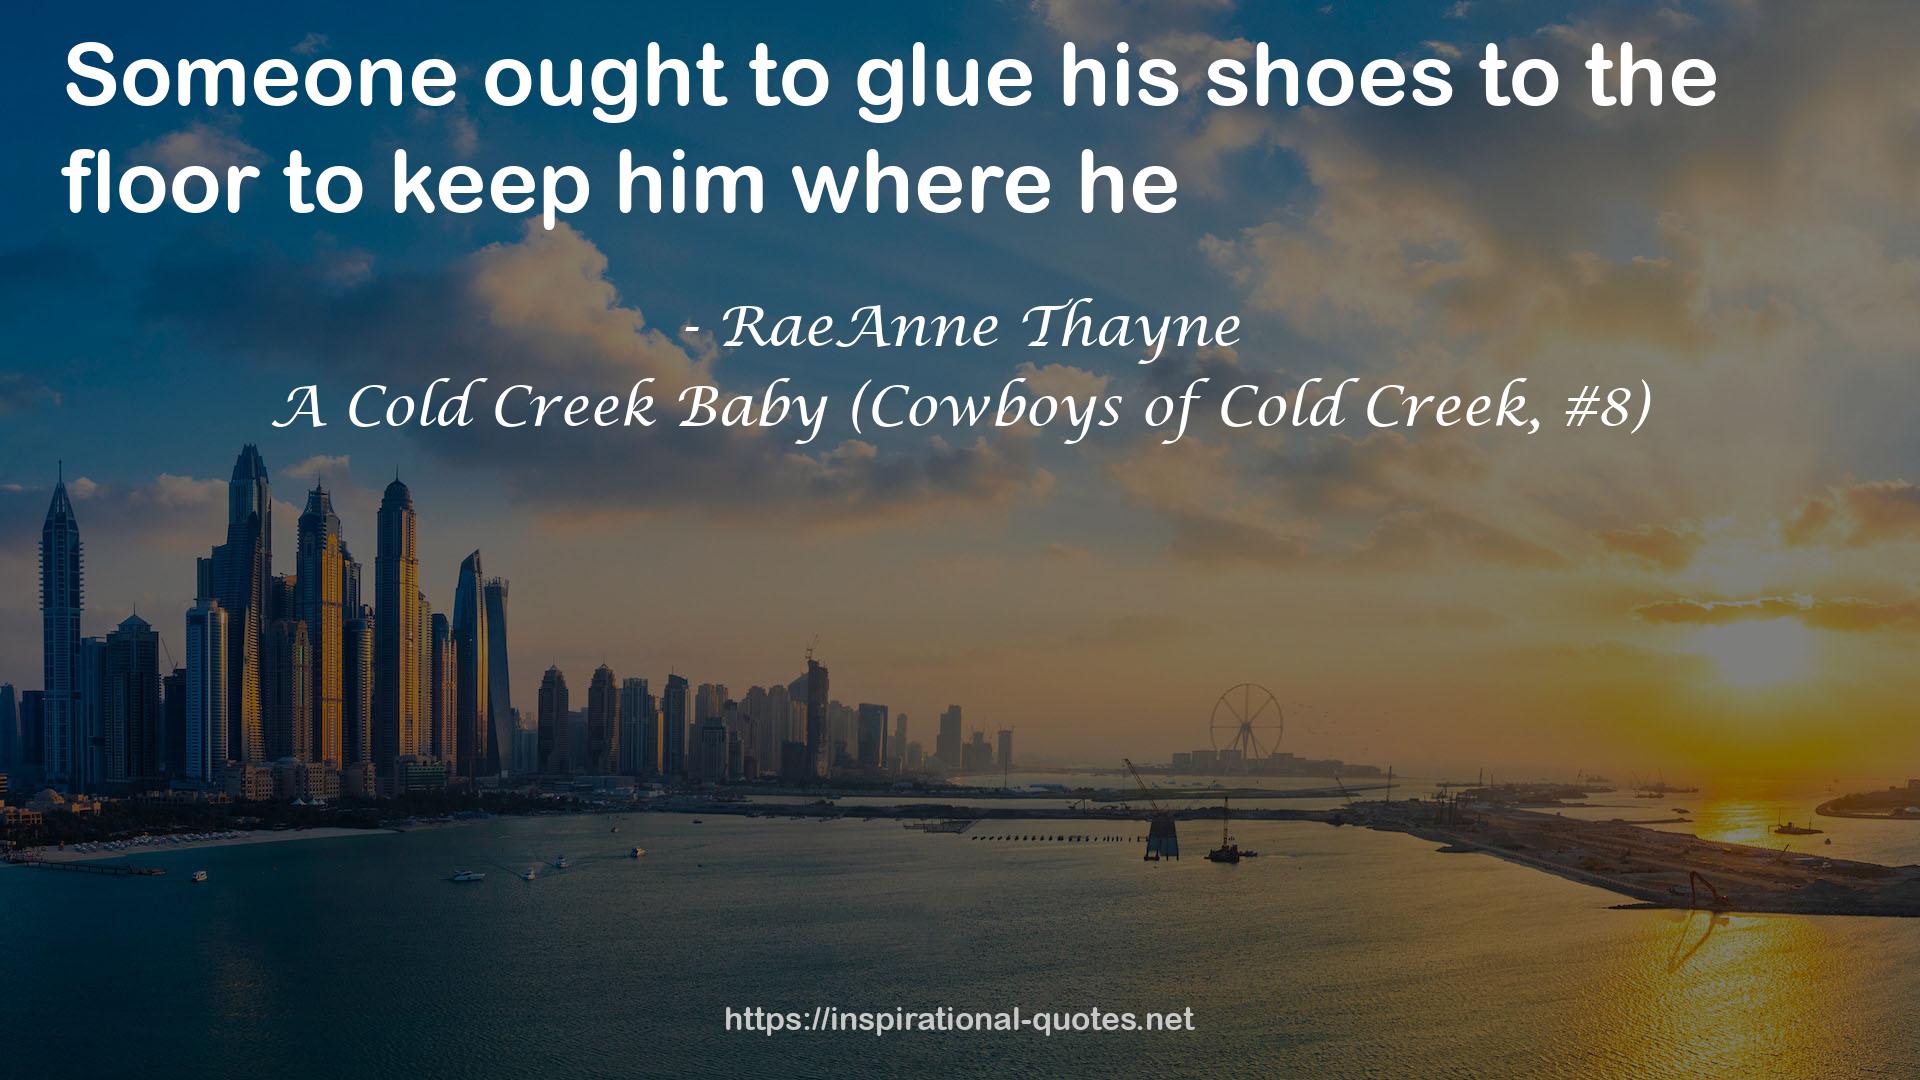 A Cold Creek Baby (Cowboys of Cold Creek, #8) QUOTES